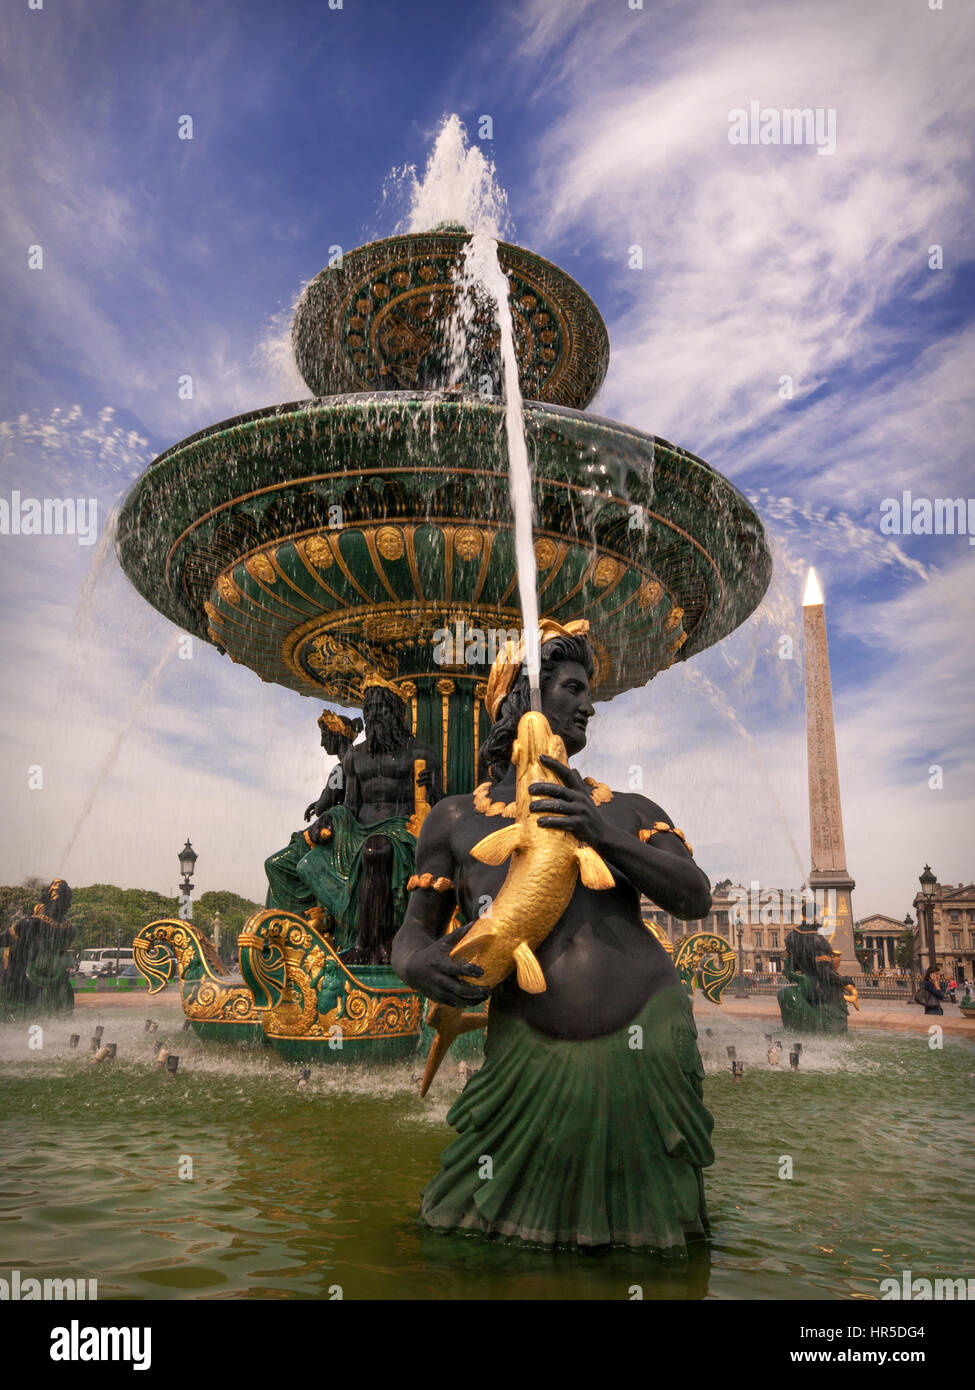 Fountain on Place de la Concorde in Paris, France. The Luxor Obelisk is in the background. Stock Photo